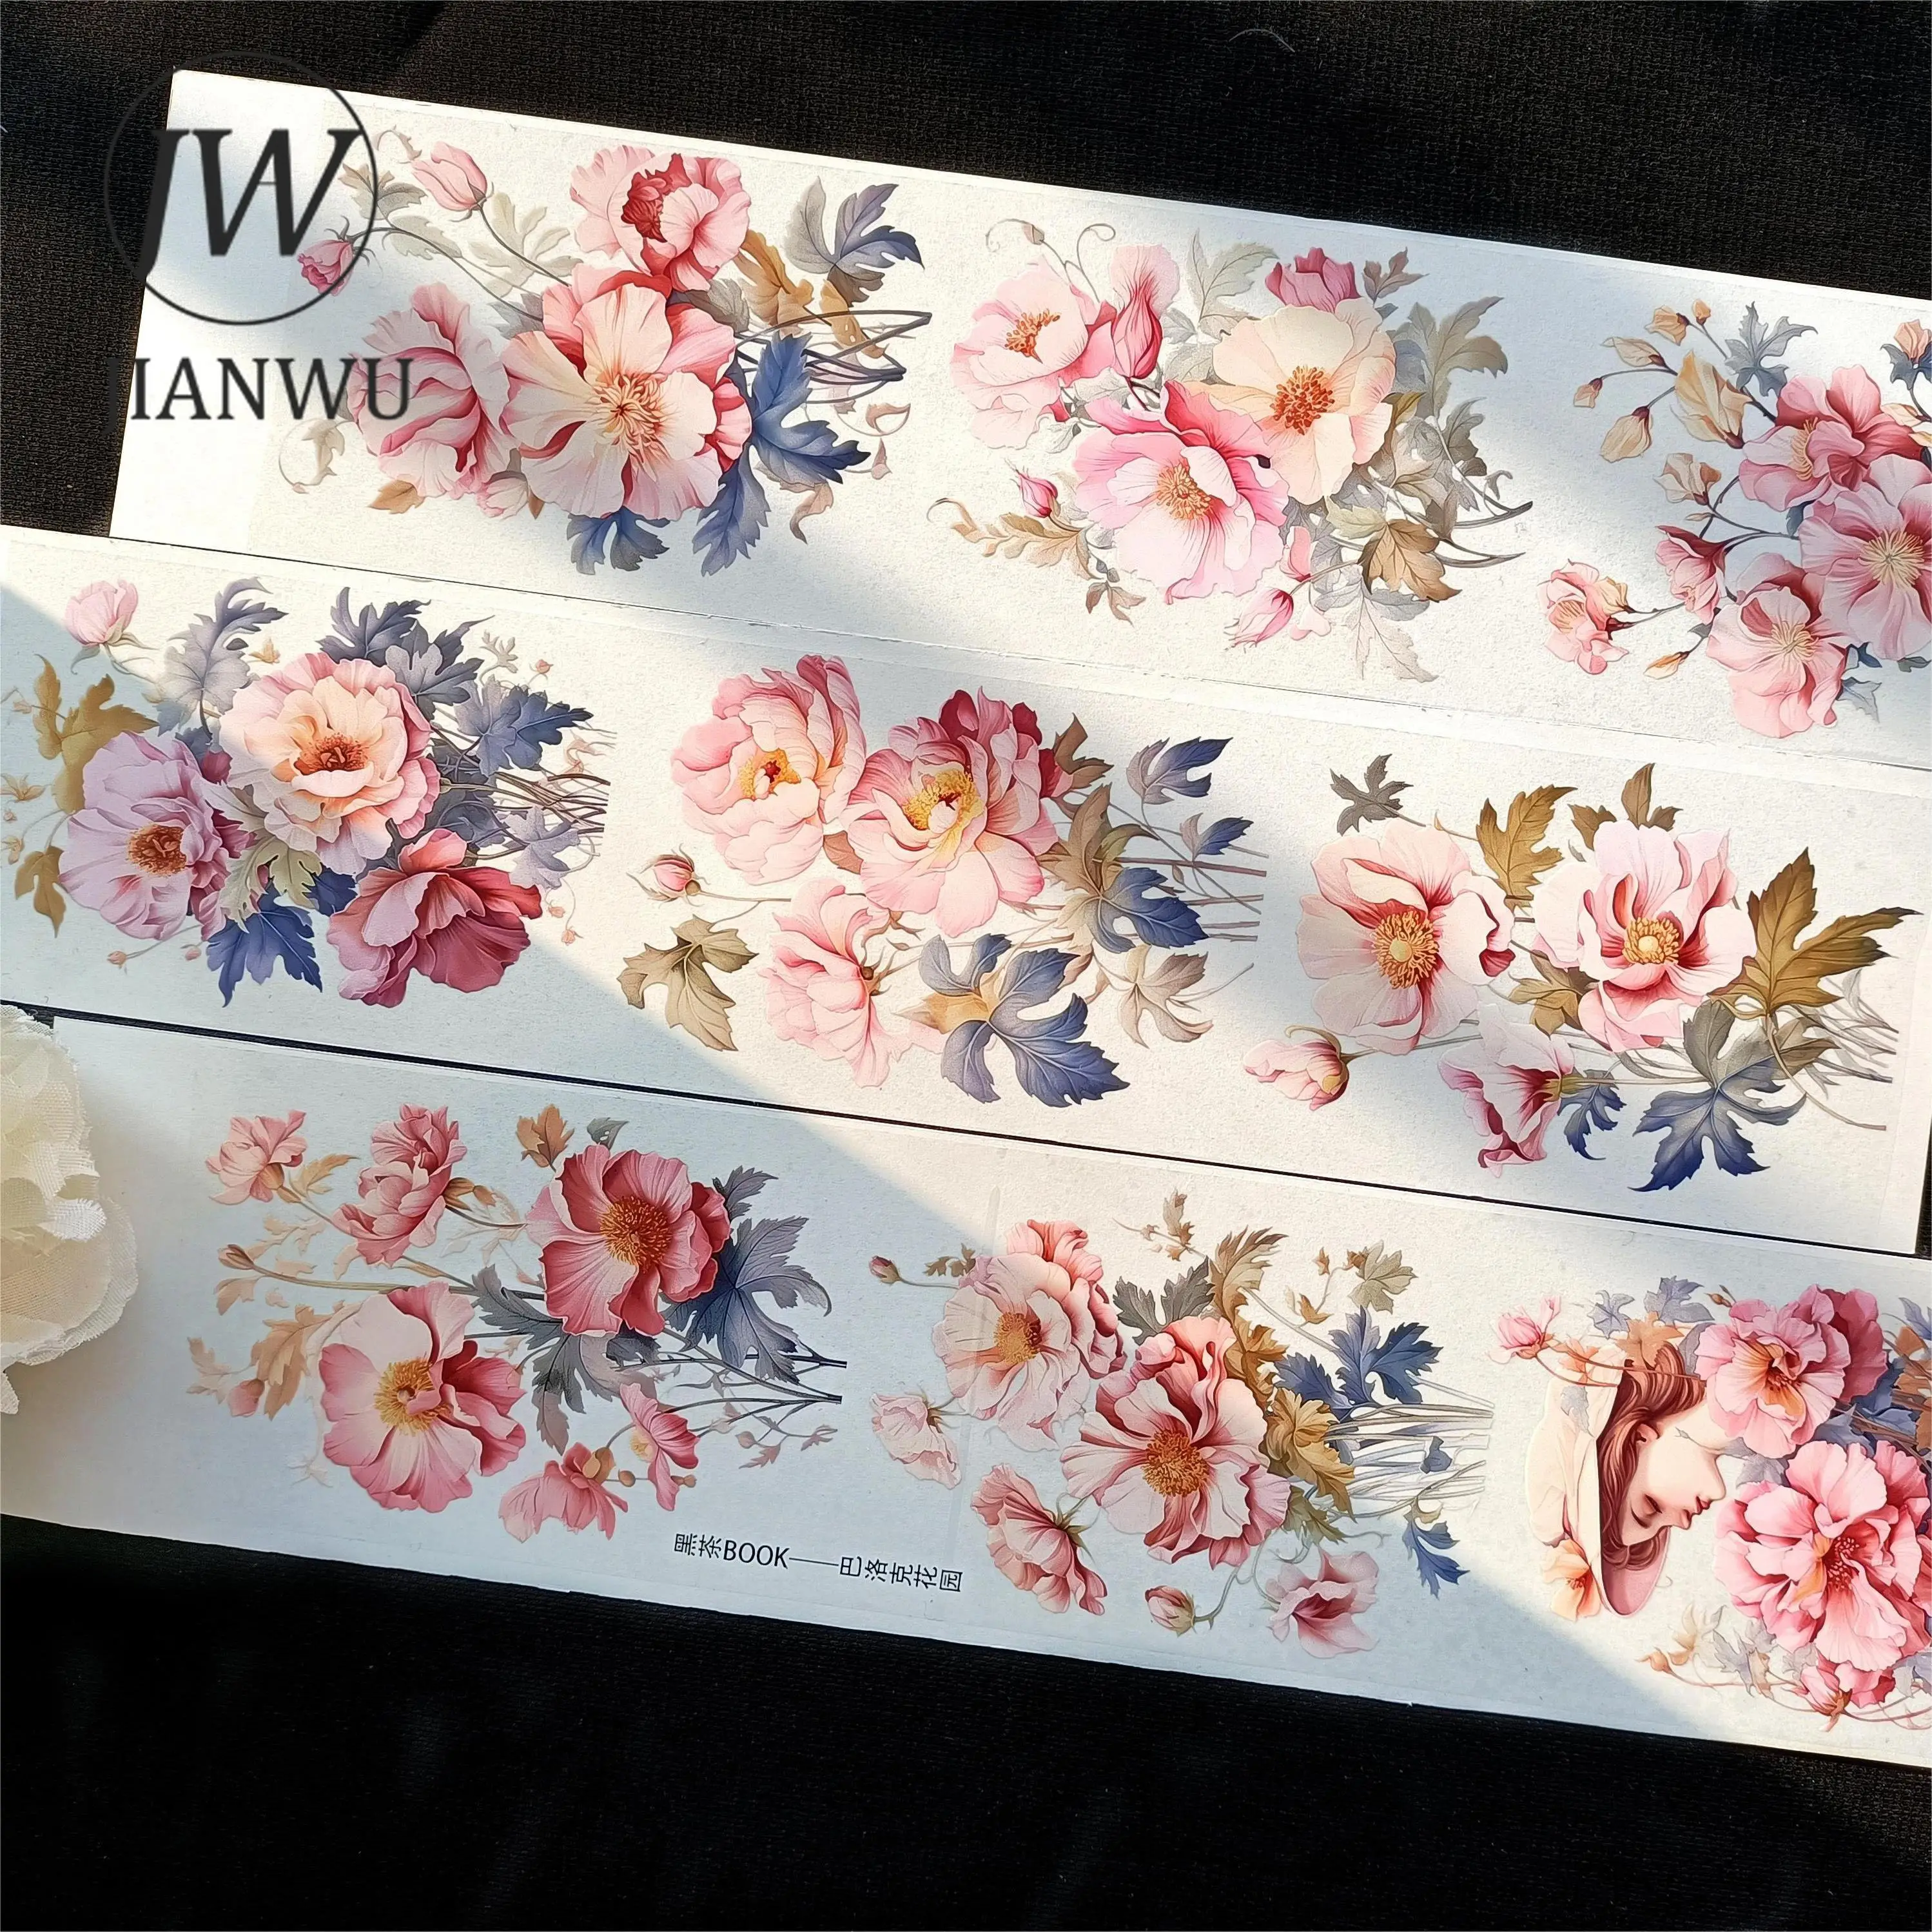 

JIANWU Multi-Specification Vintage Flower Character Material Decor PET Tape Creative DIY Journal Collage Stationery